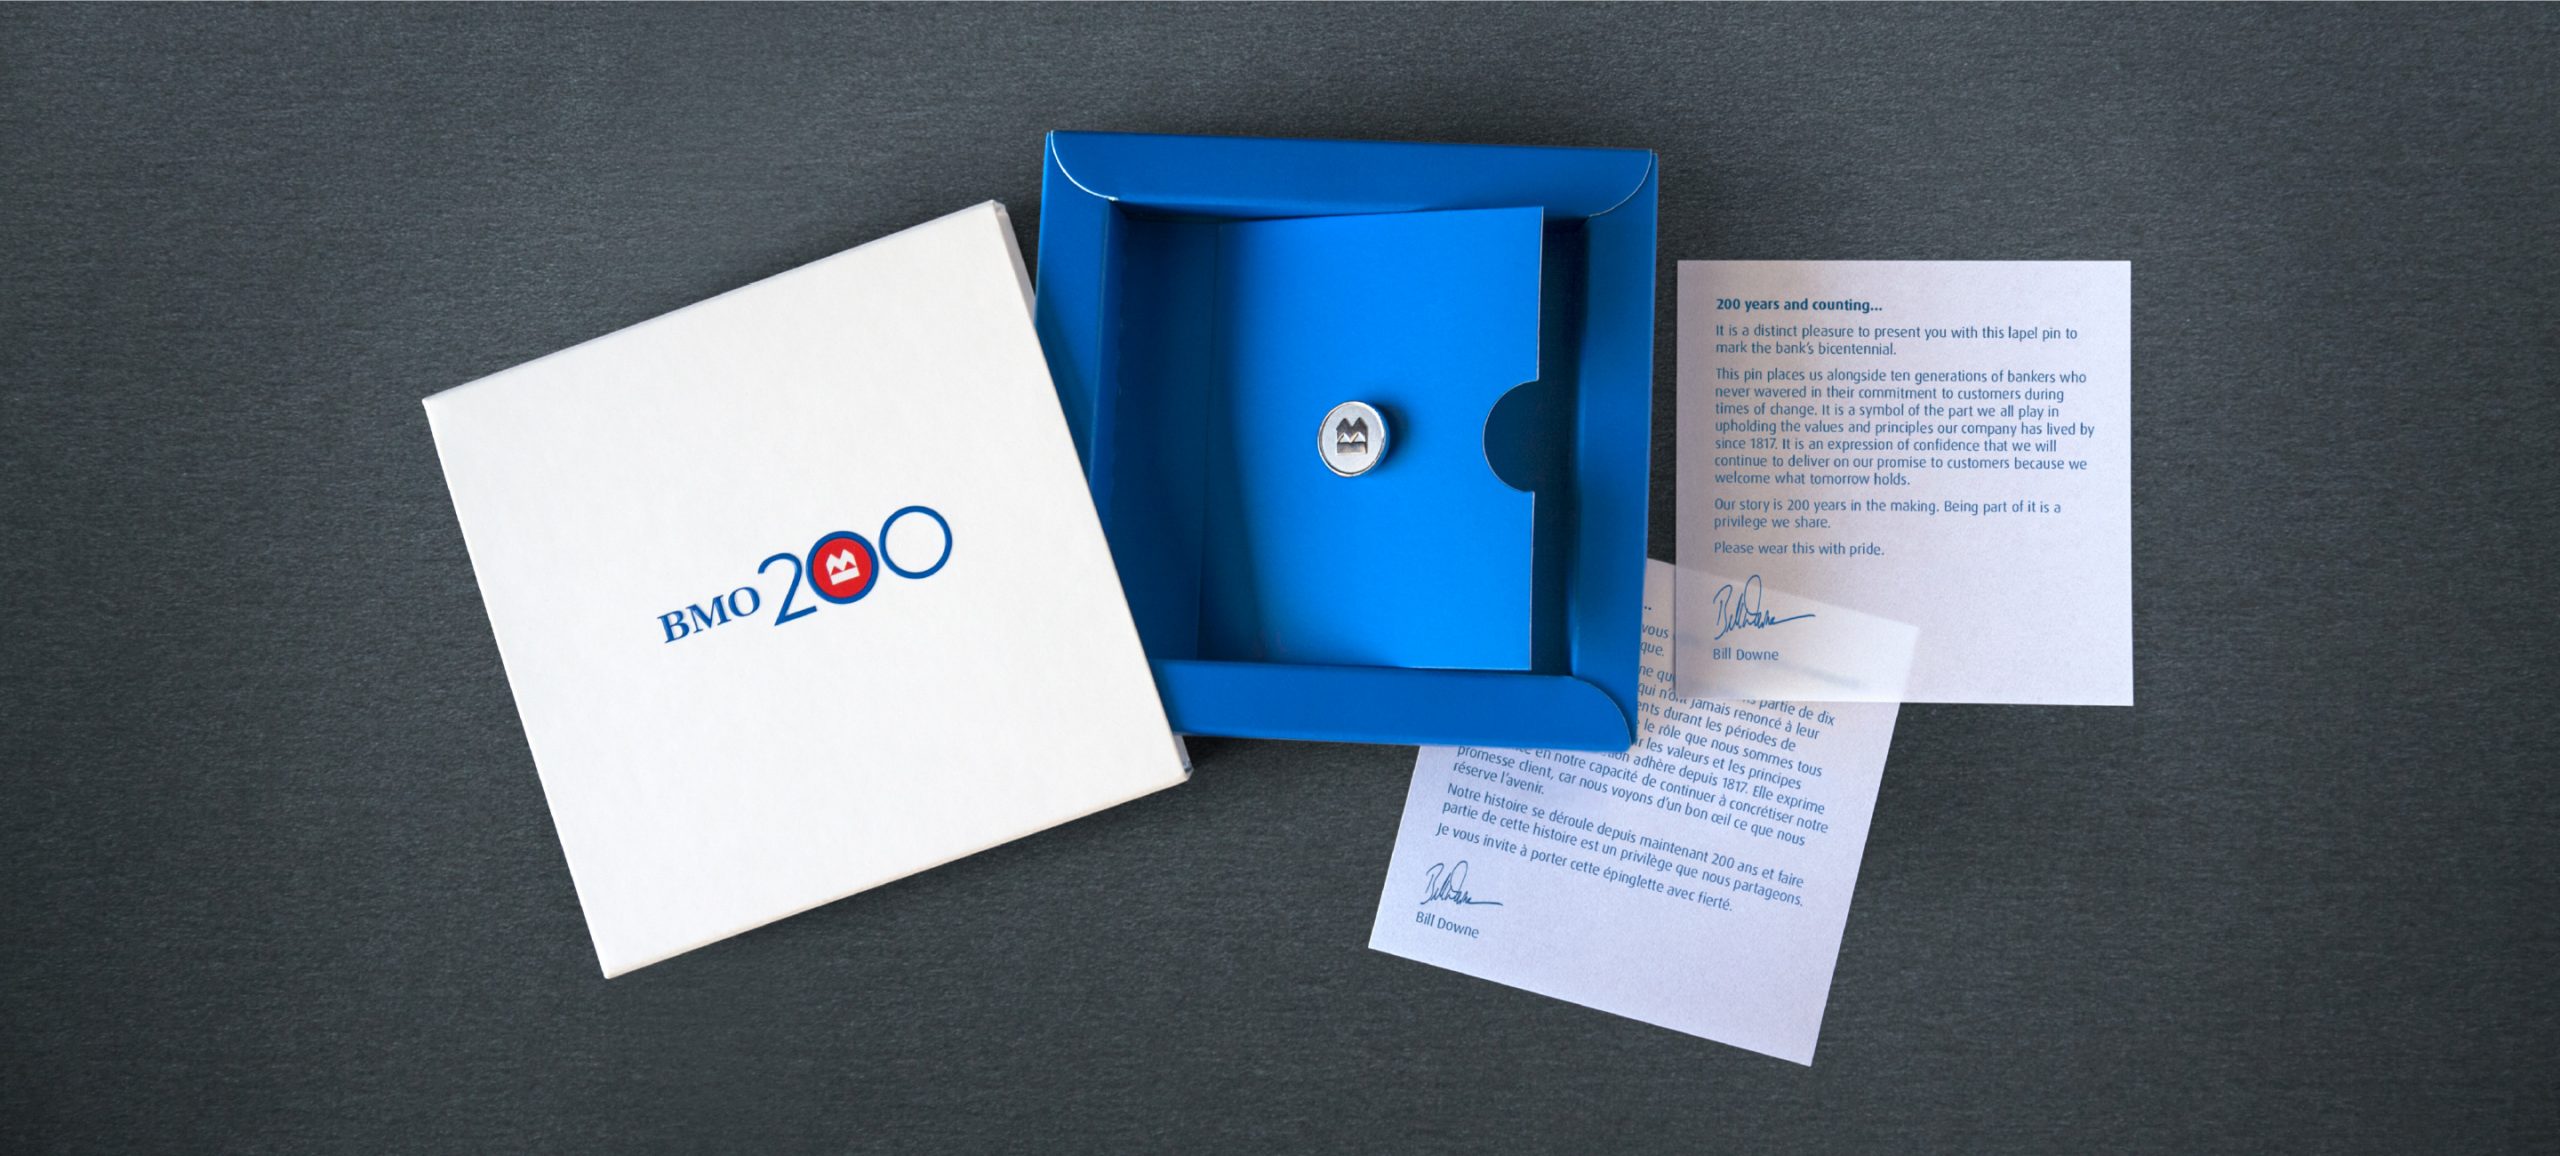 The packaging holding the BMO pin along with a booklet and letters are displayed.